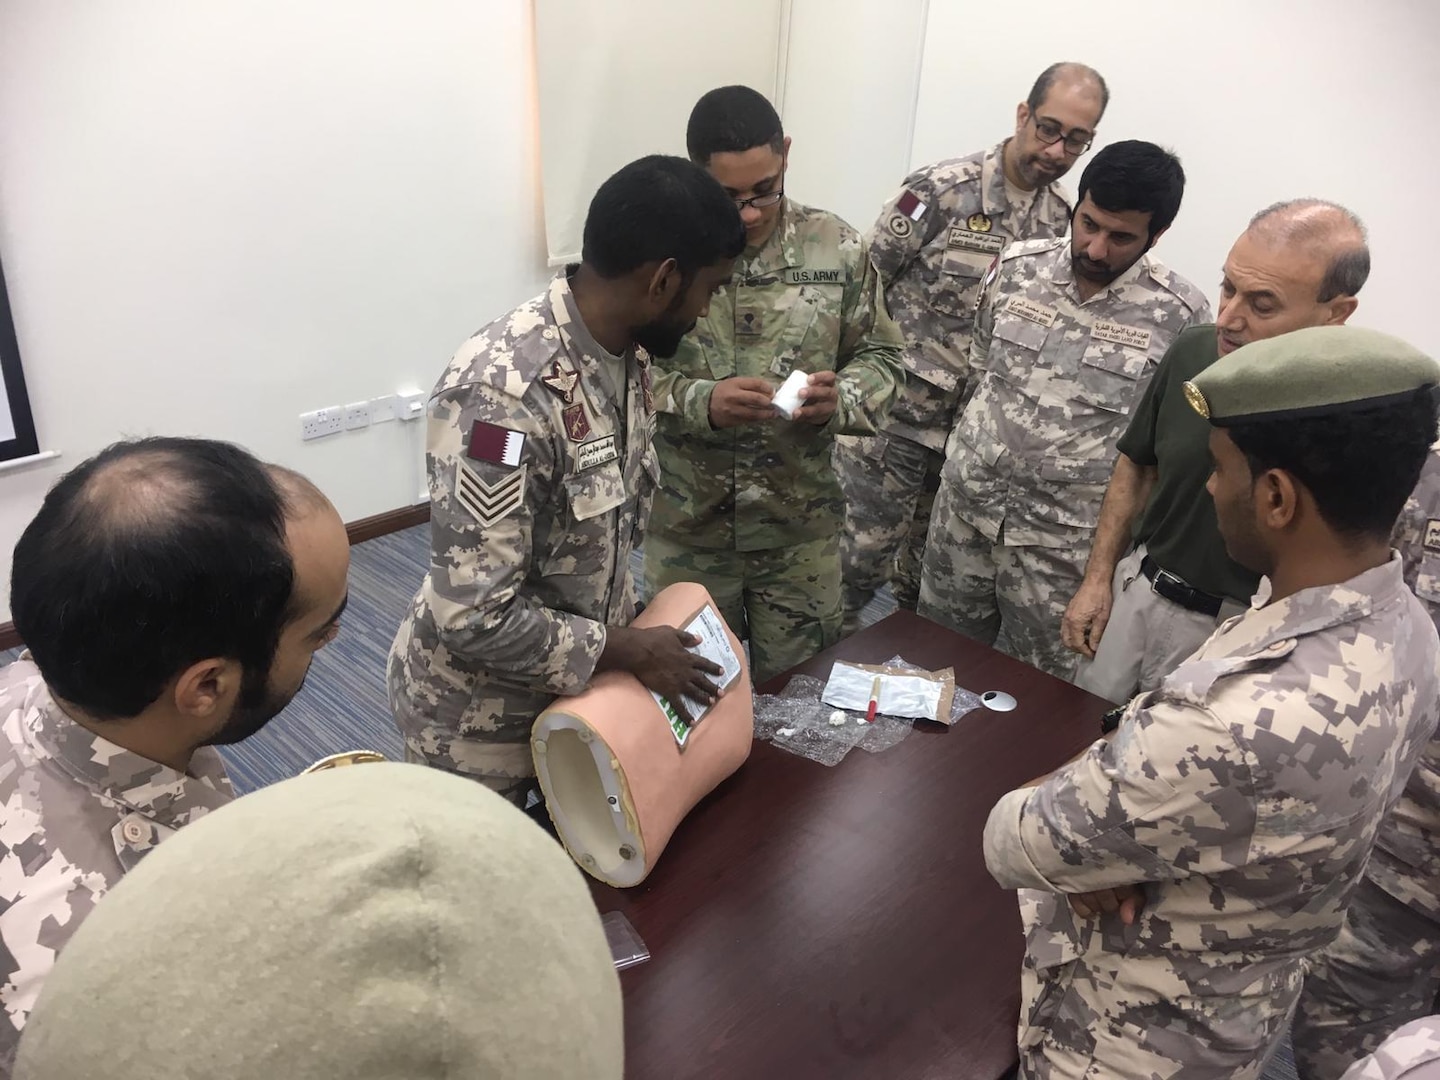 A New Jersey Army National Guard Soldier discusses a Tactical Combat Casualty Care (TCCC) scenario with members of the Qatari Emiri Land Forces (QELF) Sept. 8 -12, 2019, at the Qatar Emiri Land Force Artillery School in Al Rayyan Municipality, Qatar.